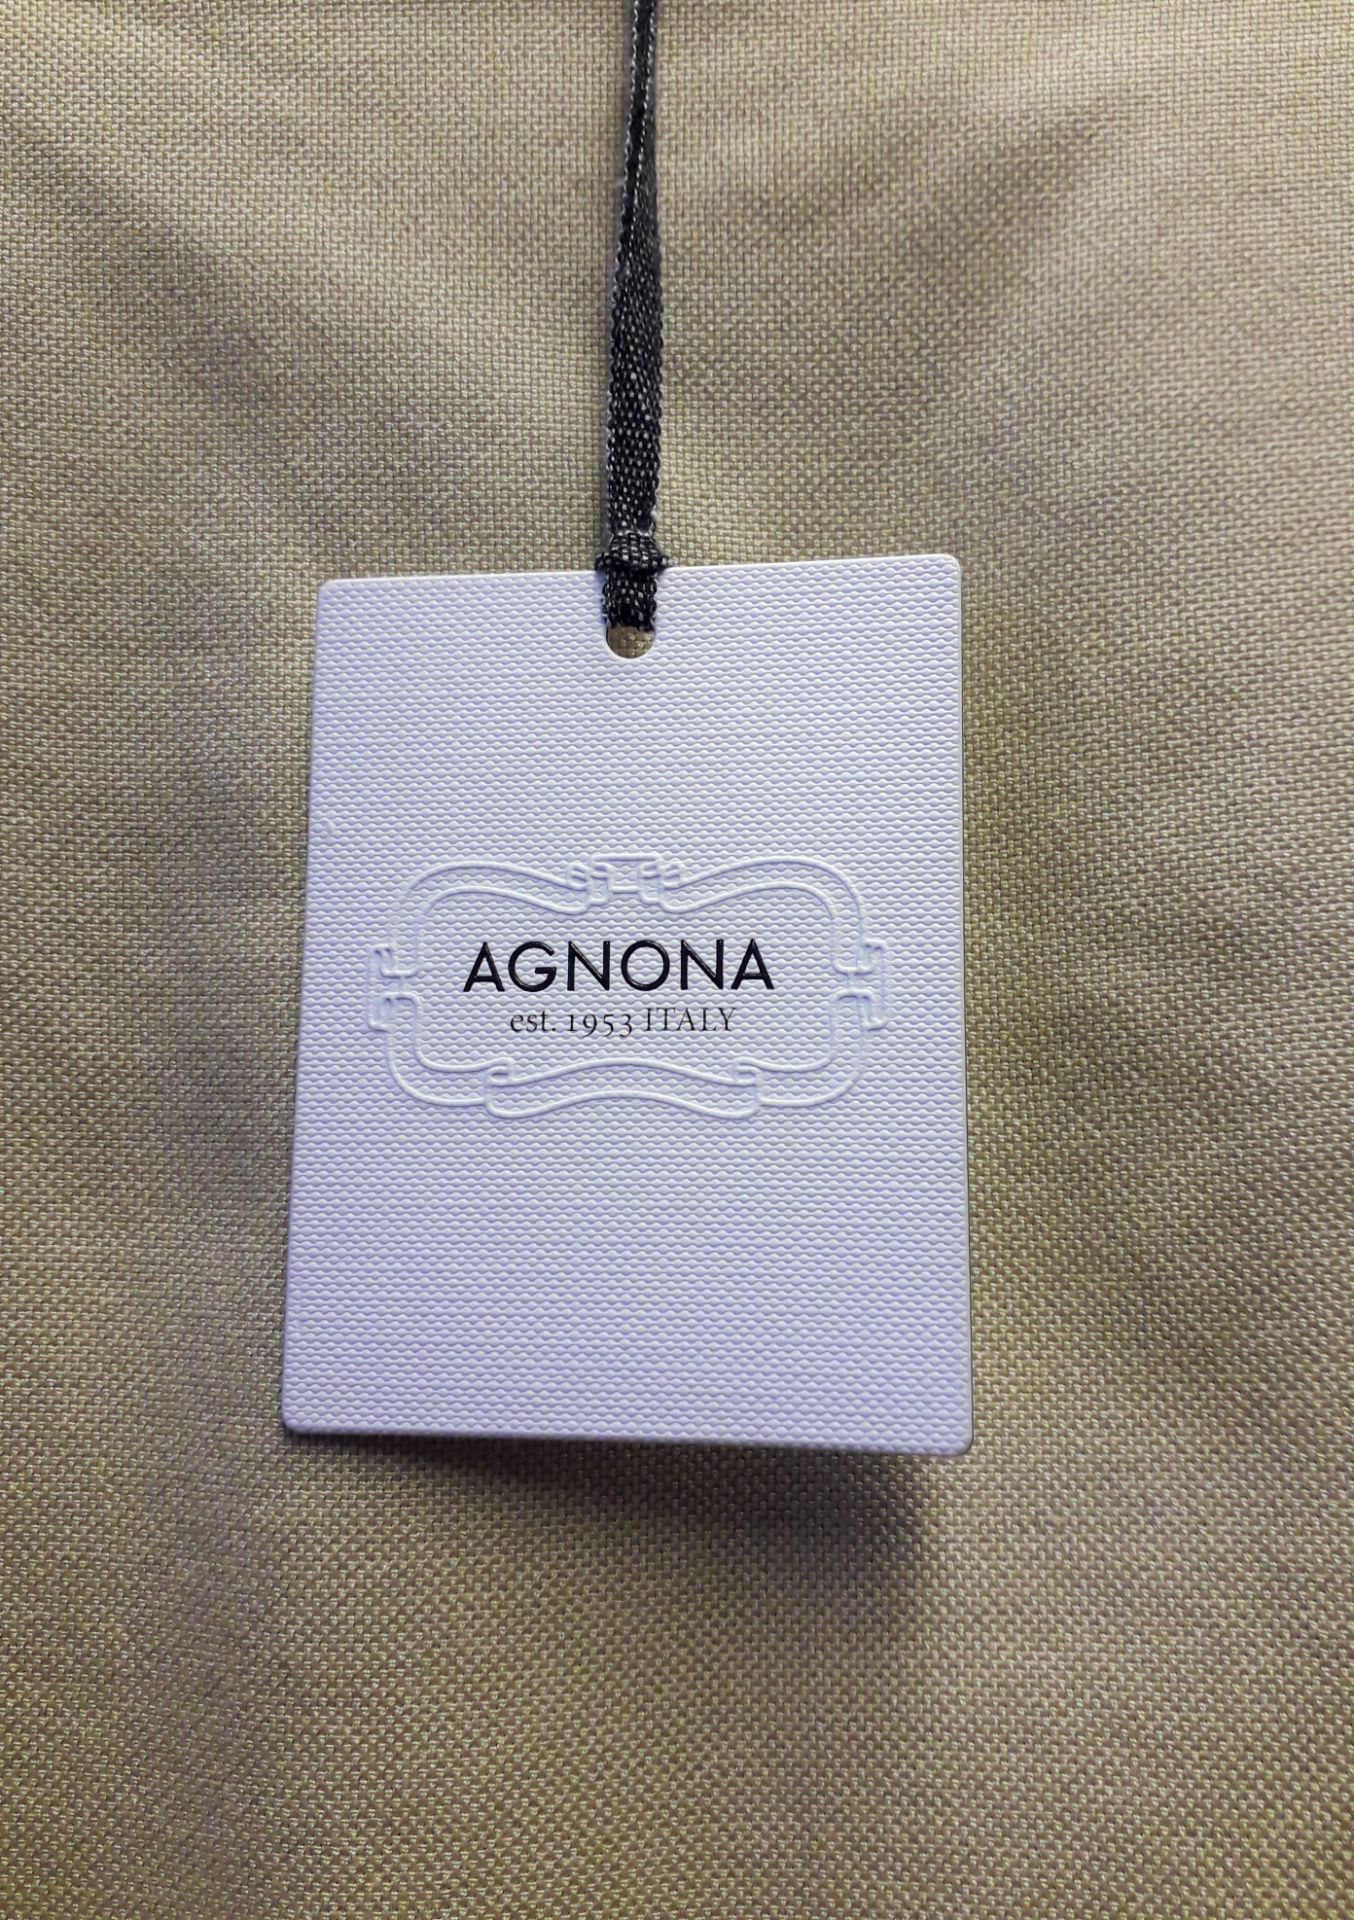 1 x Agnona Sand Curved Hem Skirt - Size: 18 - Material: 97% Cotton, 2% Nylon, 1% Elastane - From a - Image 4 of 5